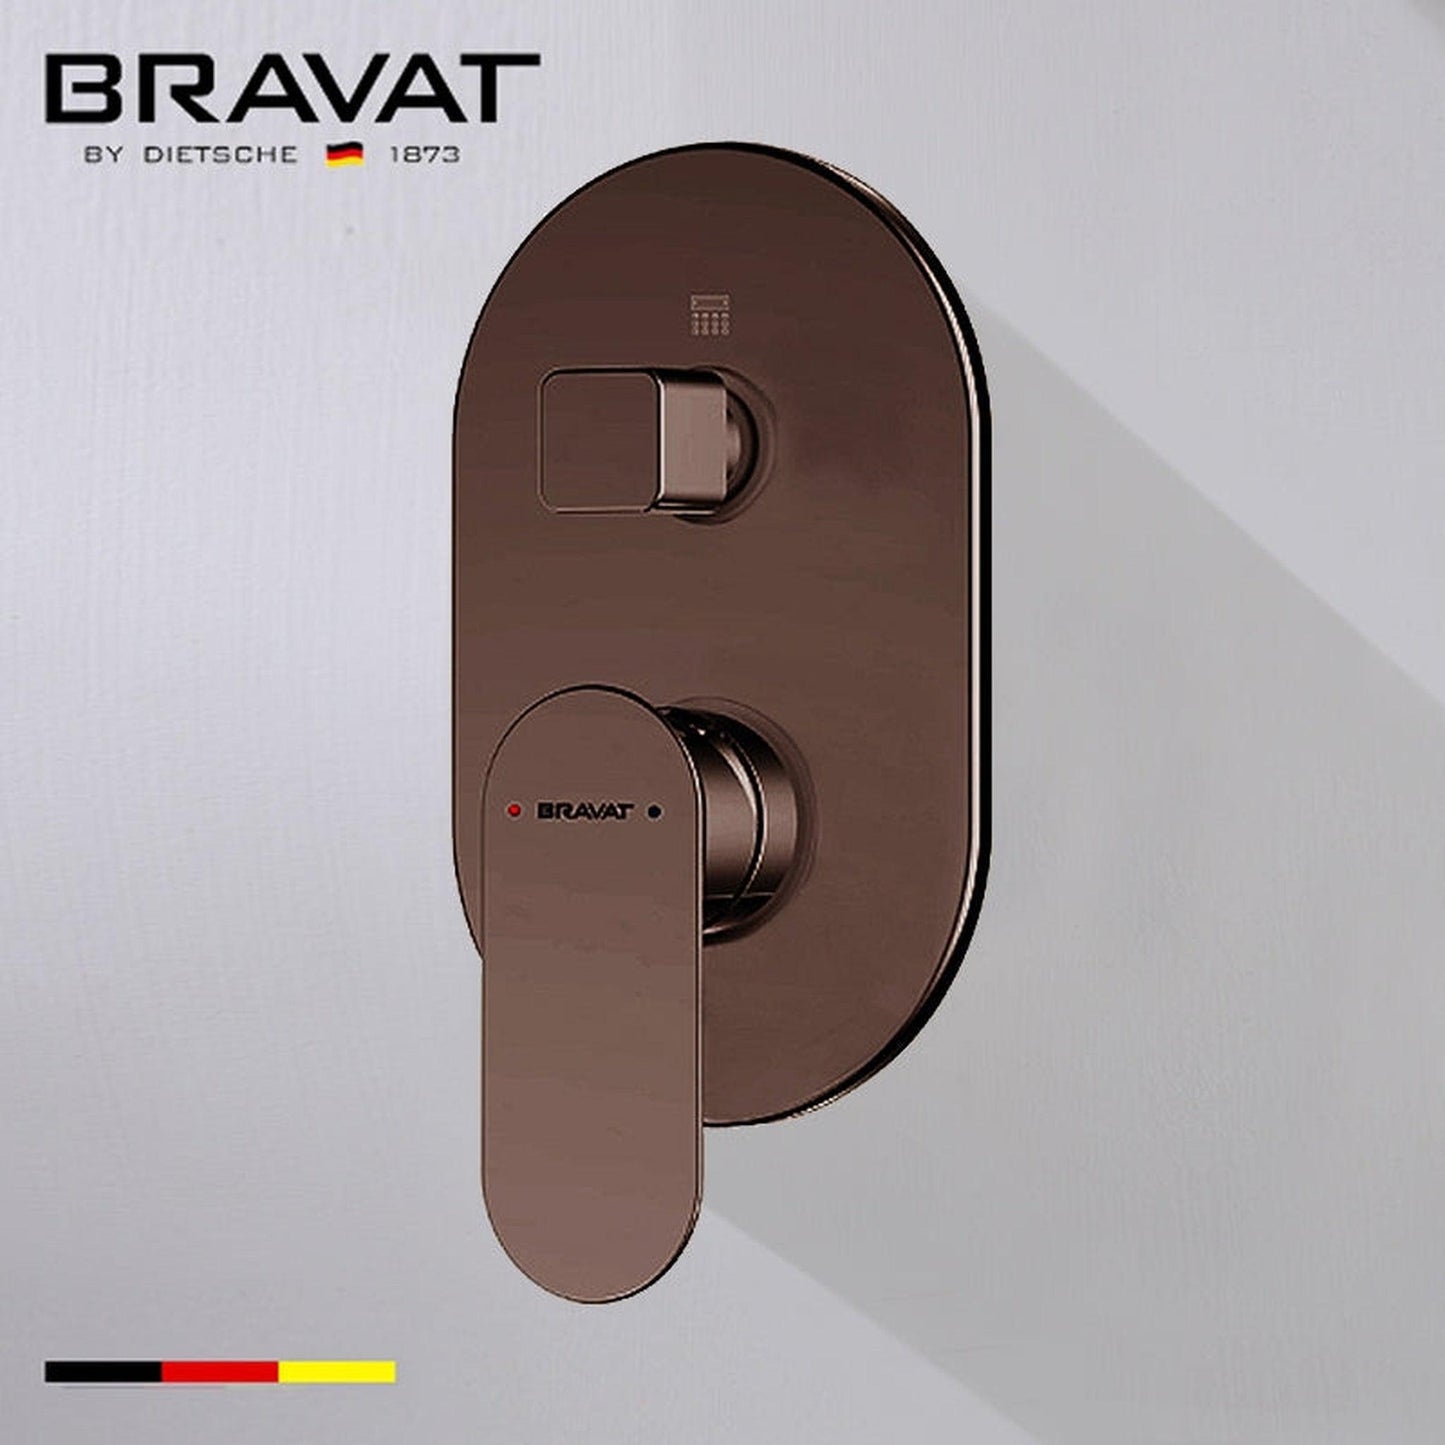 Fontana Bravat Light Oil Rubbed Bronze Round Ceiling Mounted LED Rainfall Shower System With Hand Shower